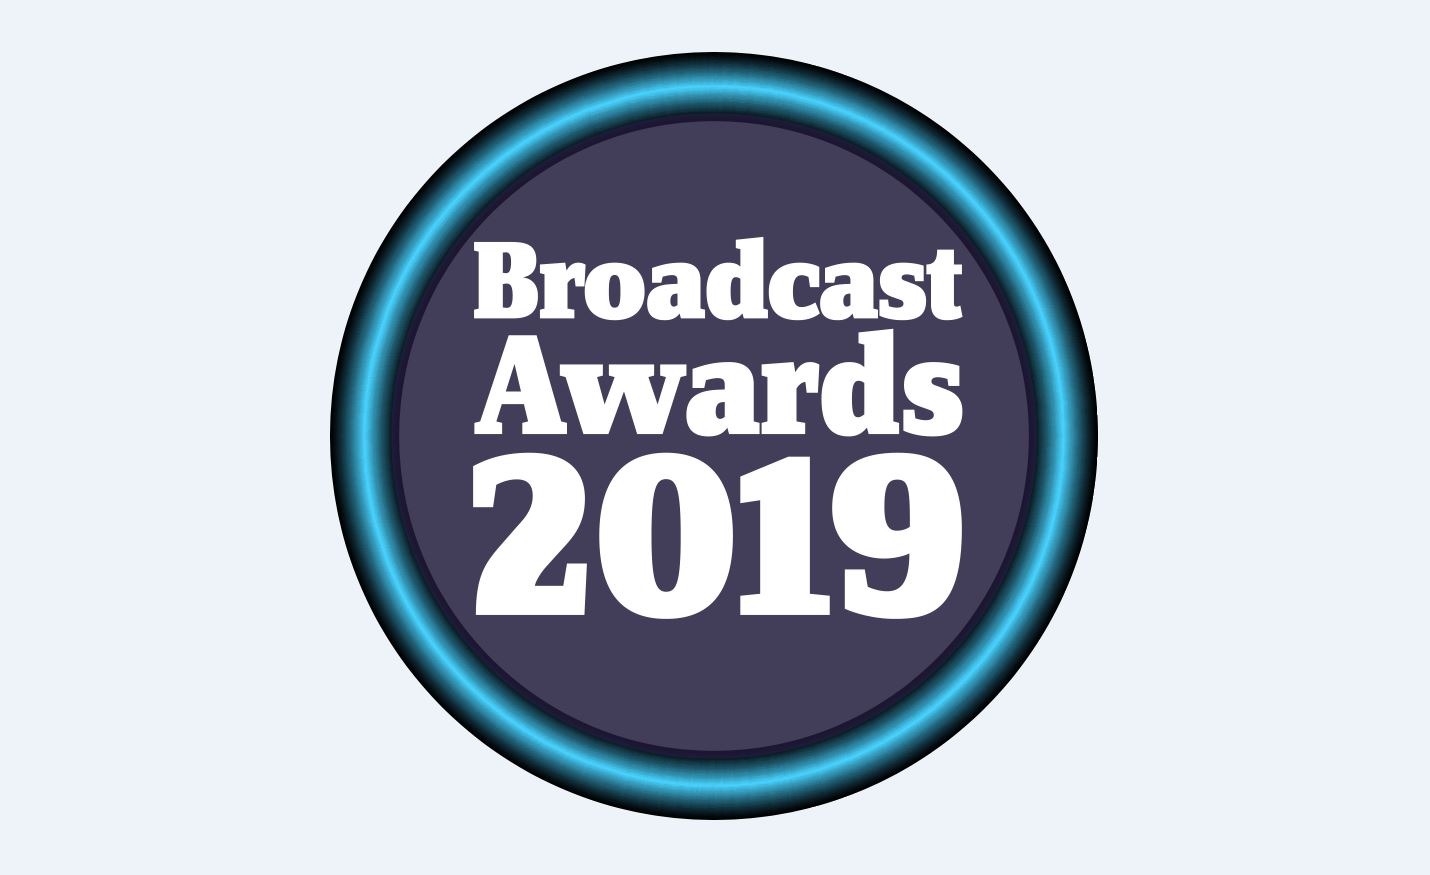 Broadcast Awards shortlist Under the Wire for Best Documentary